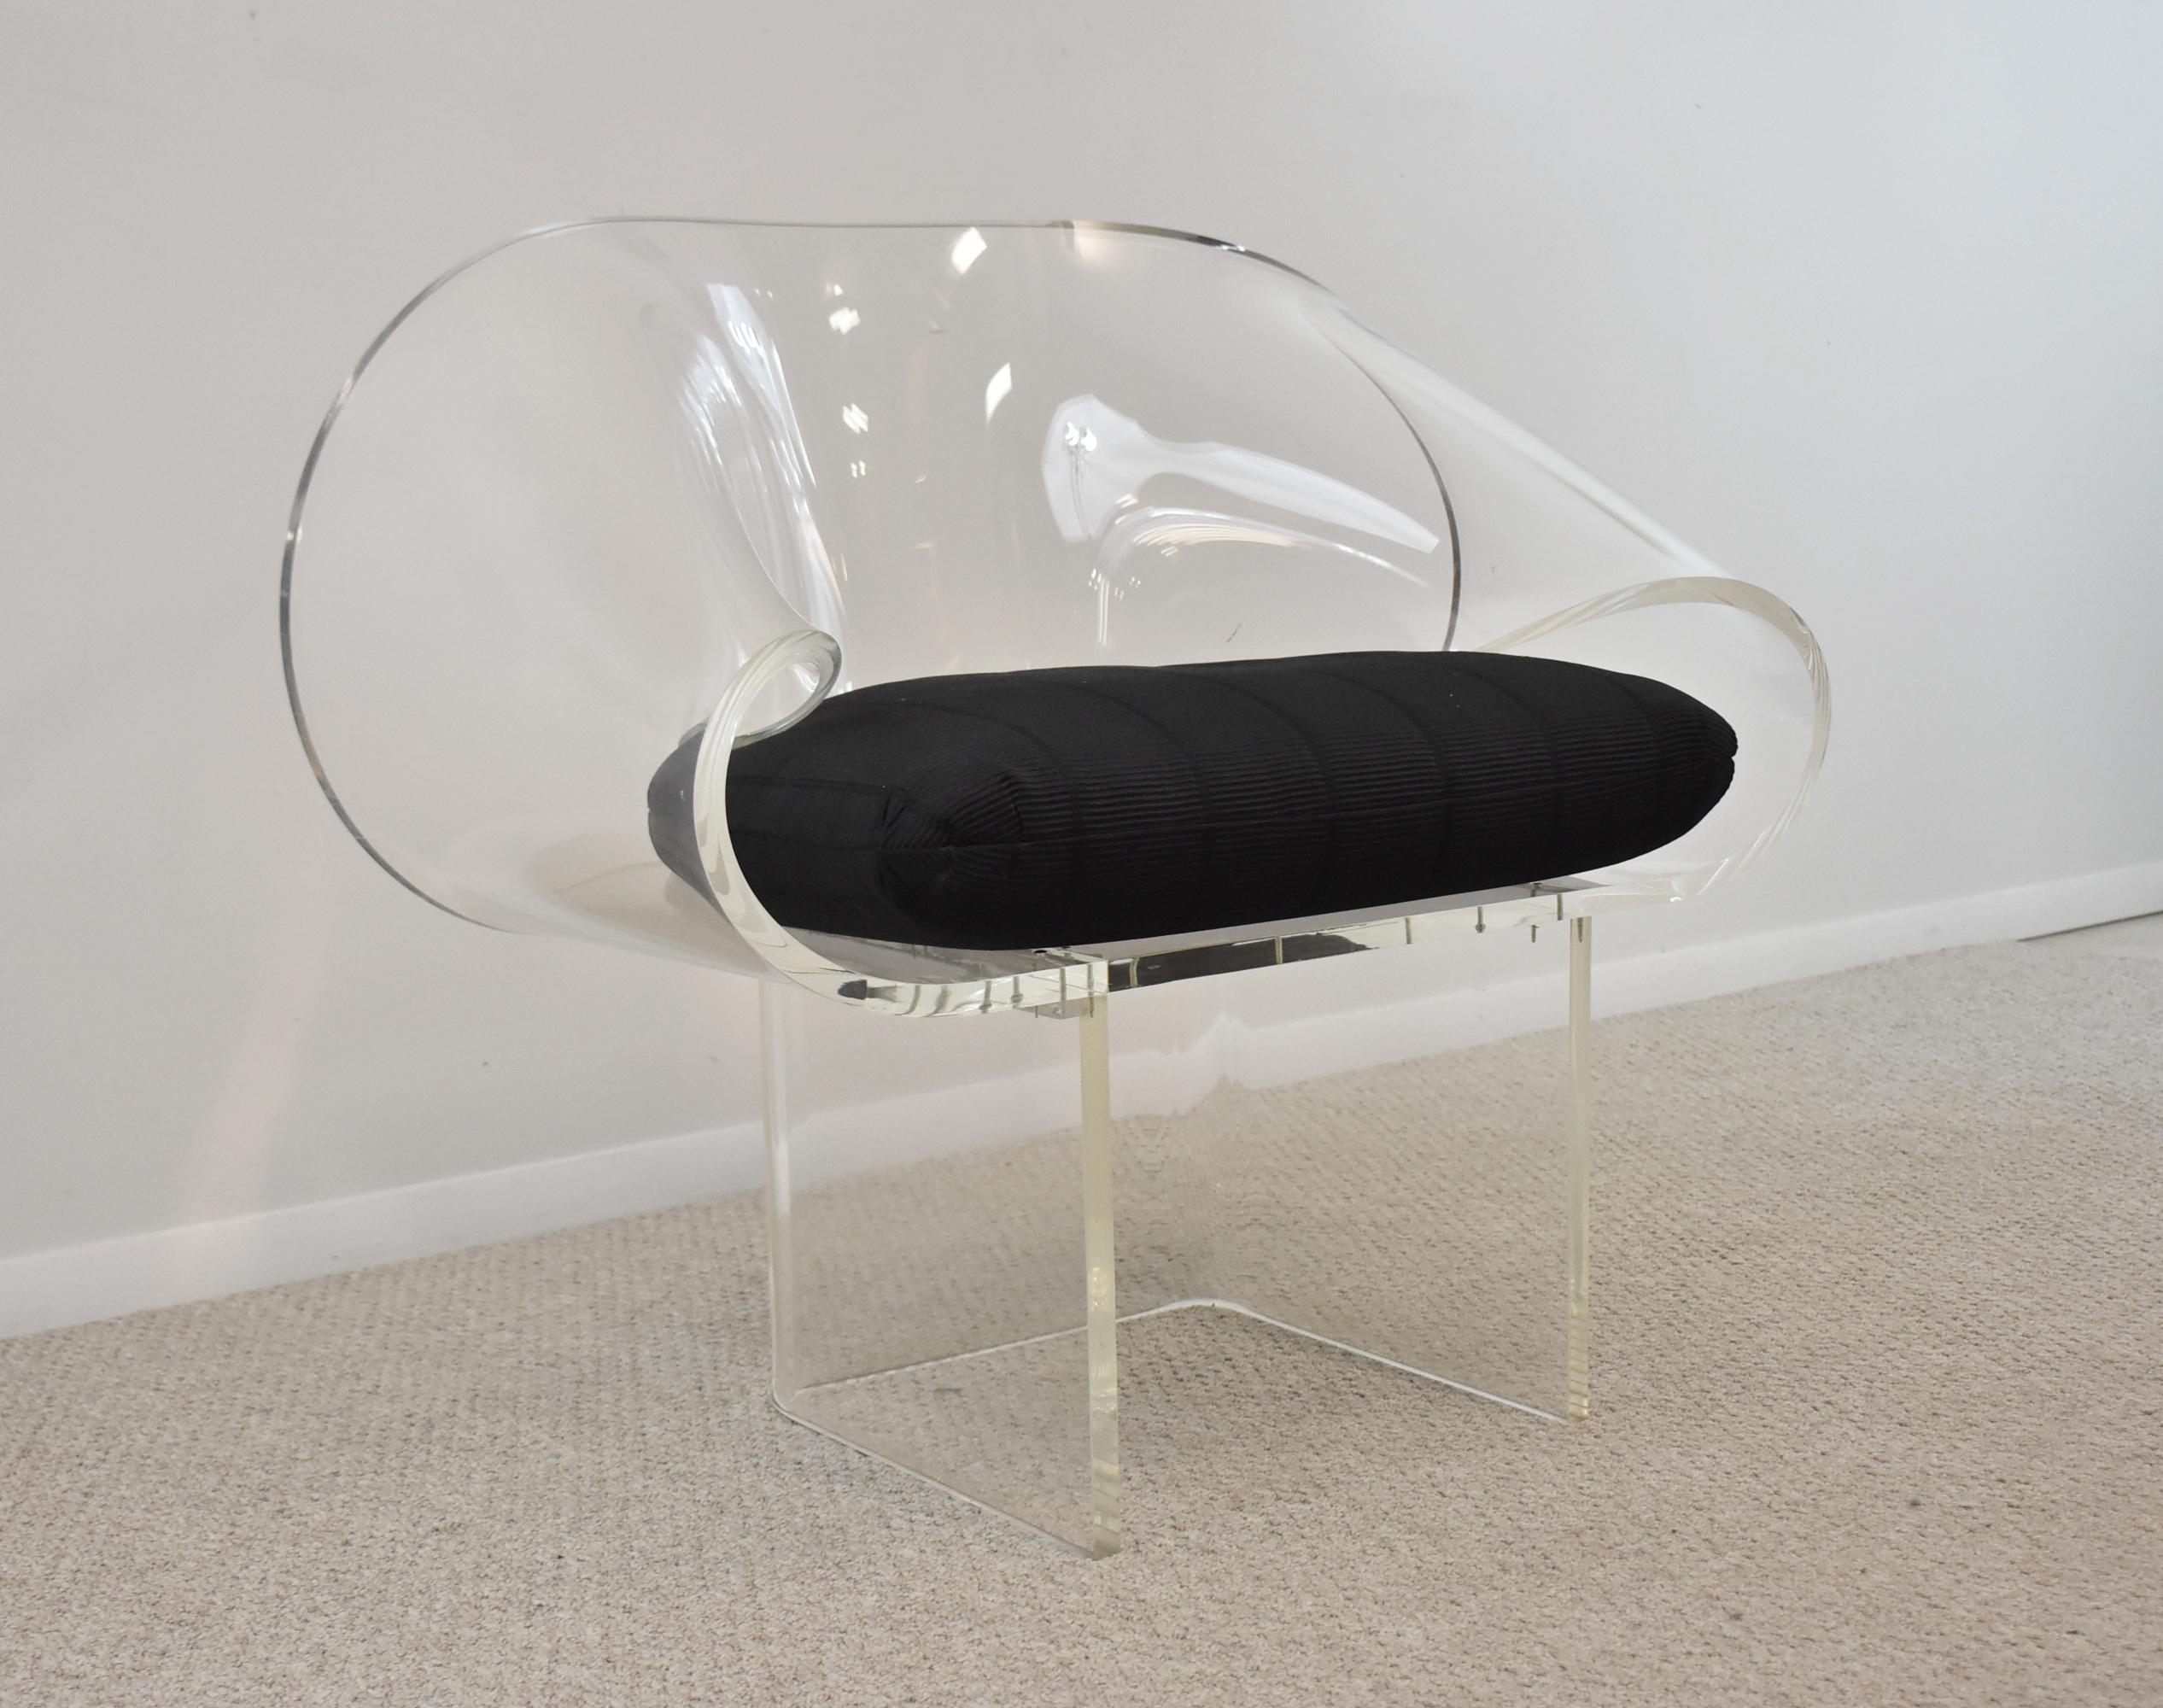 Modernist Lucite chair with a curved ribbon design form. Designed by Robert Van Horn an Associate of Charles Hollis Jones, Designed in the 1970s. Started his company in 1958 in Des Moines, Iowa. A great accent chair in excellent condition. Signed on